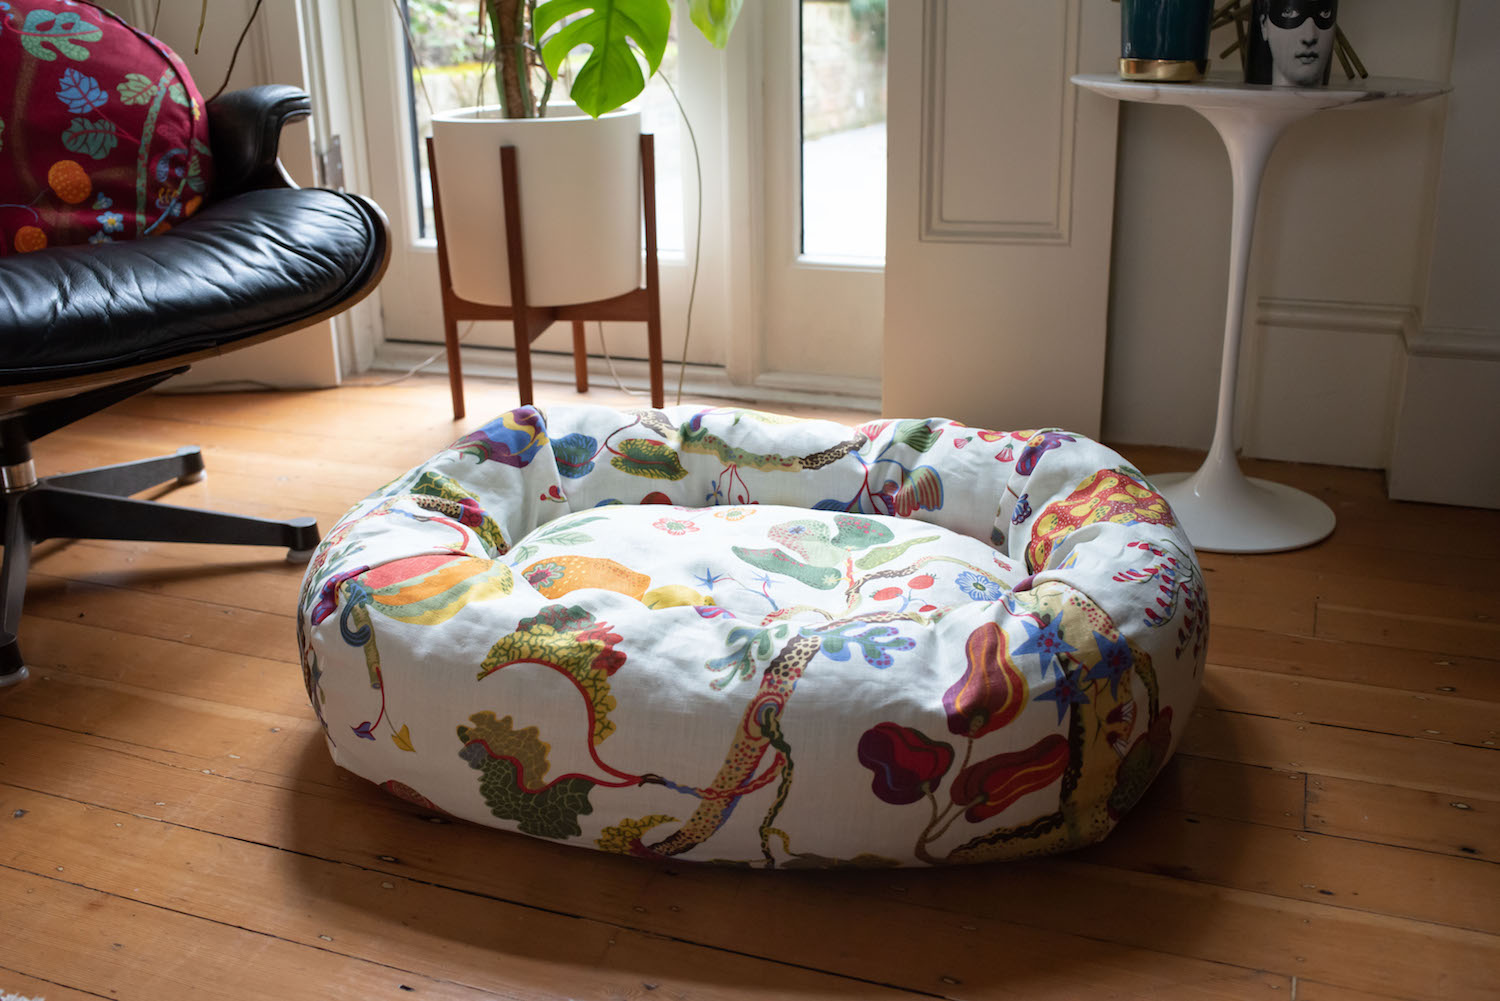 CREATE YOUR OWN DOG BED